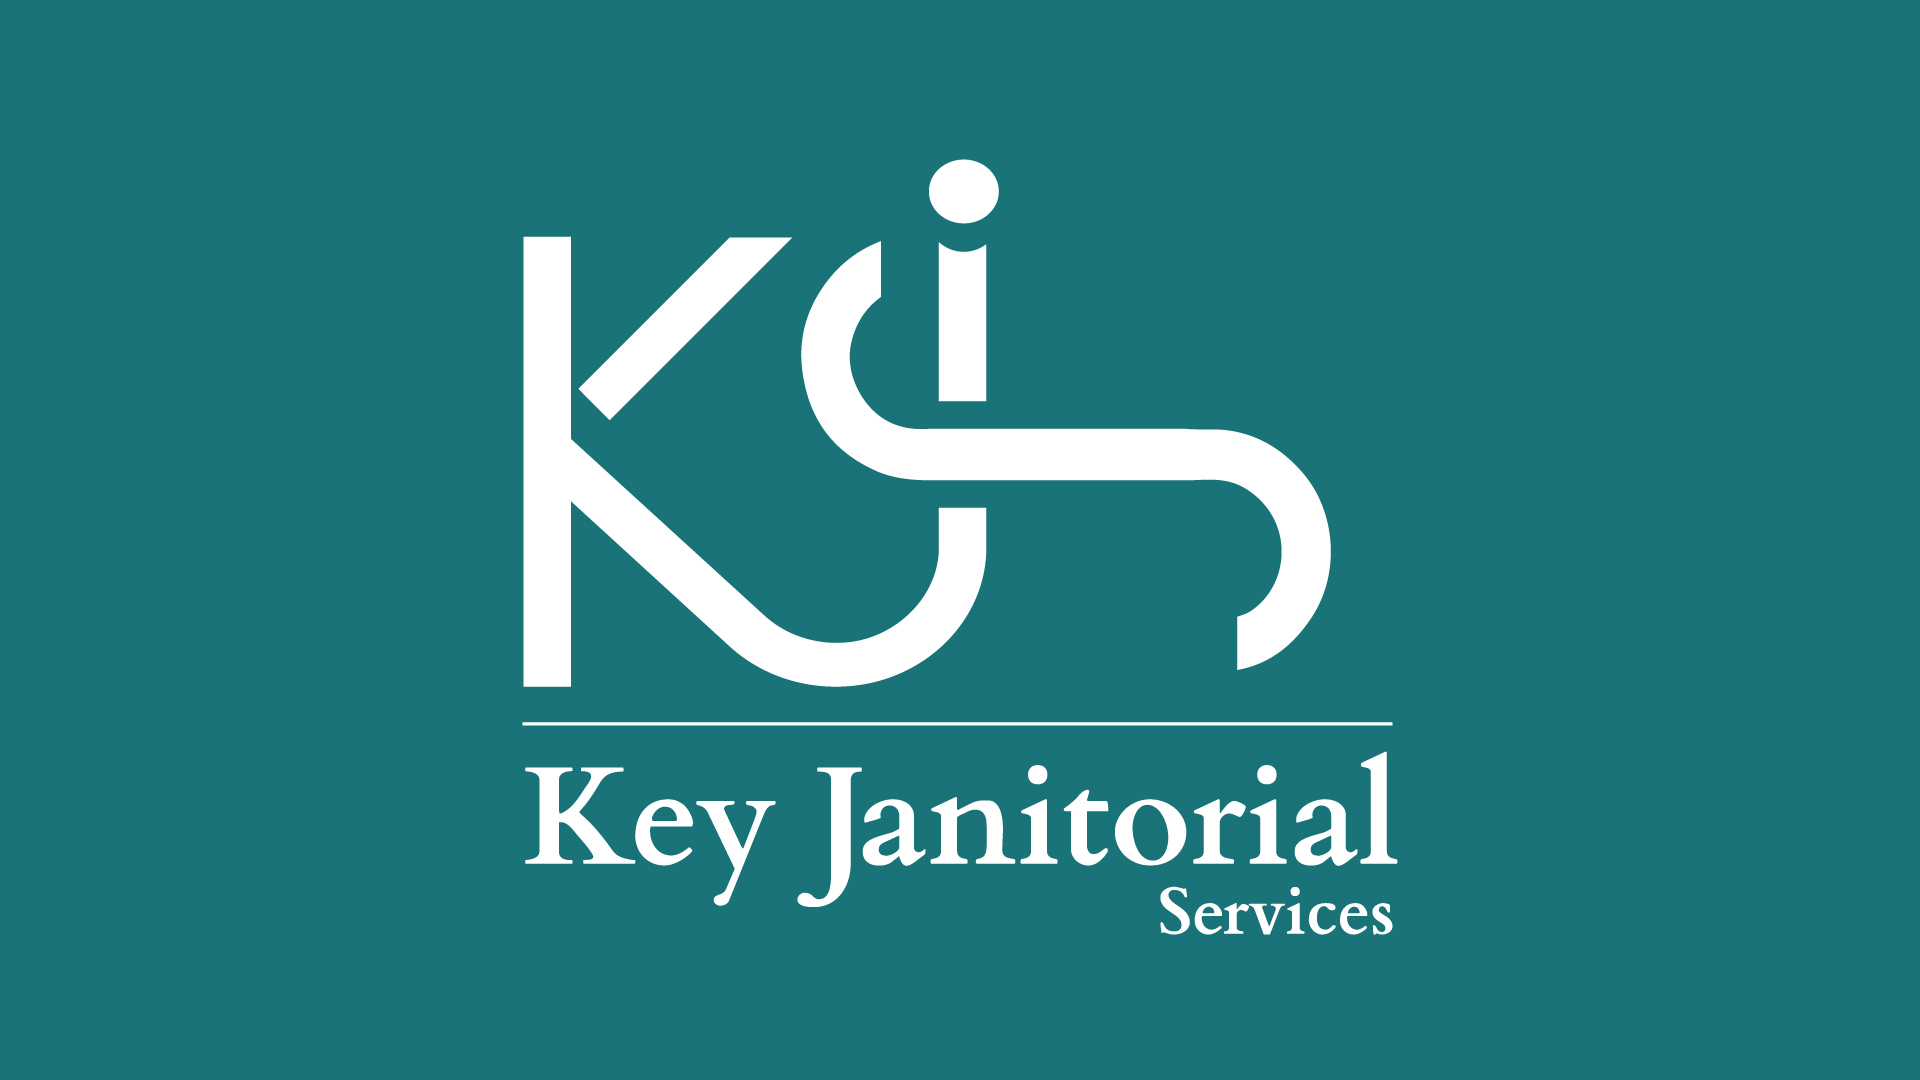 Key Janitorial Services Logo